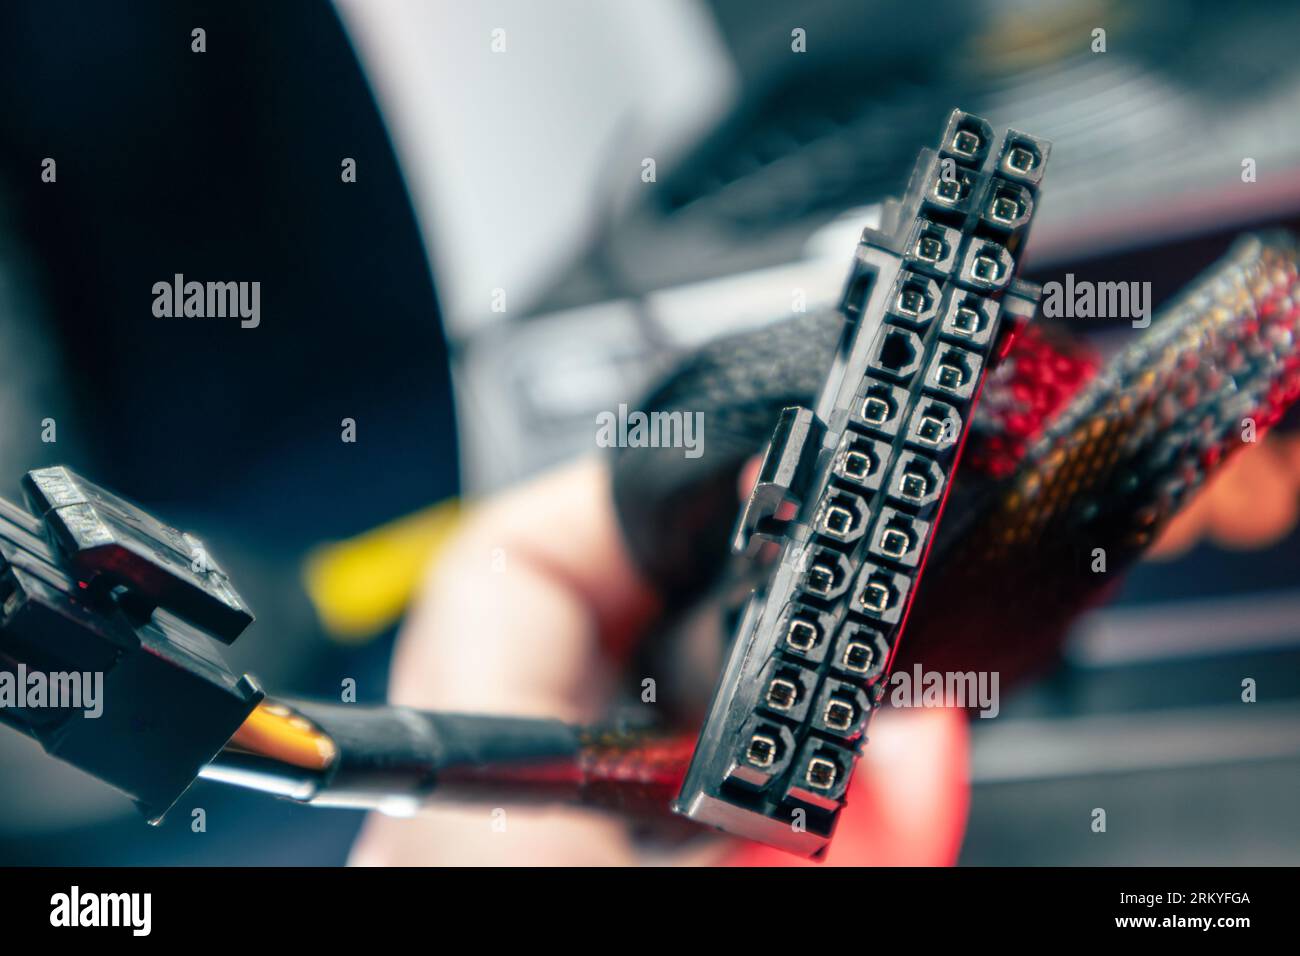 Cable connector (24 pin) from power supply unit of desktop PC close-up with blurred background. Computer wires hardware components Stock Photo